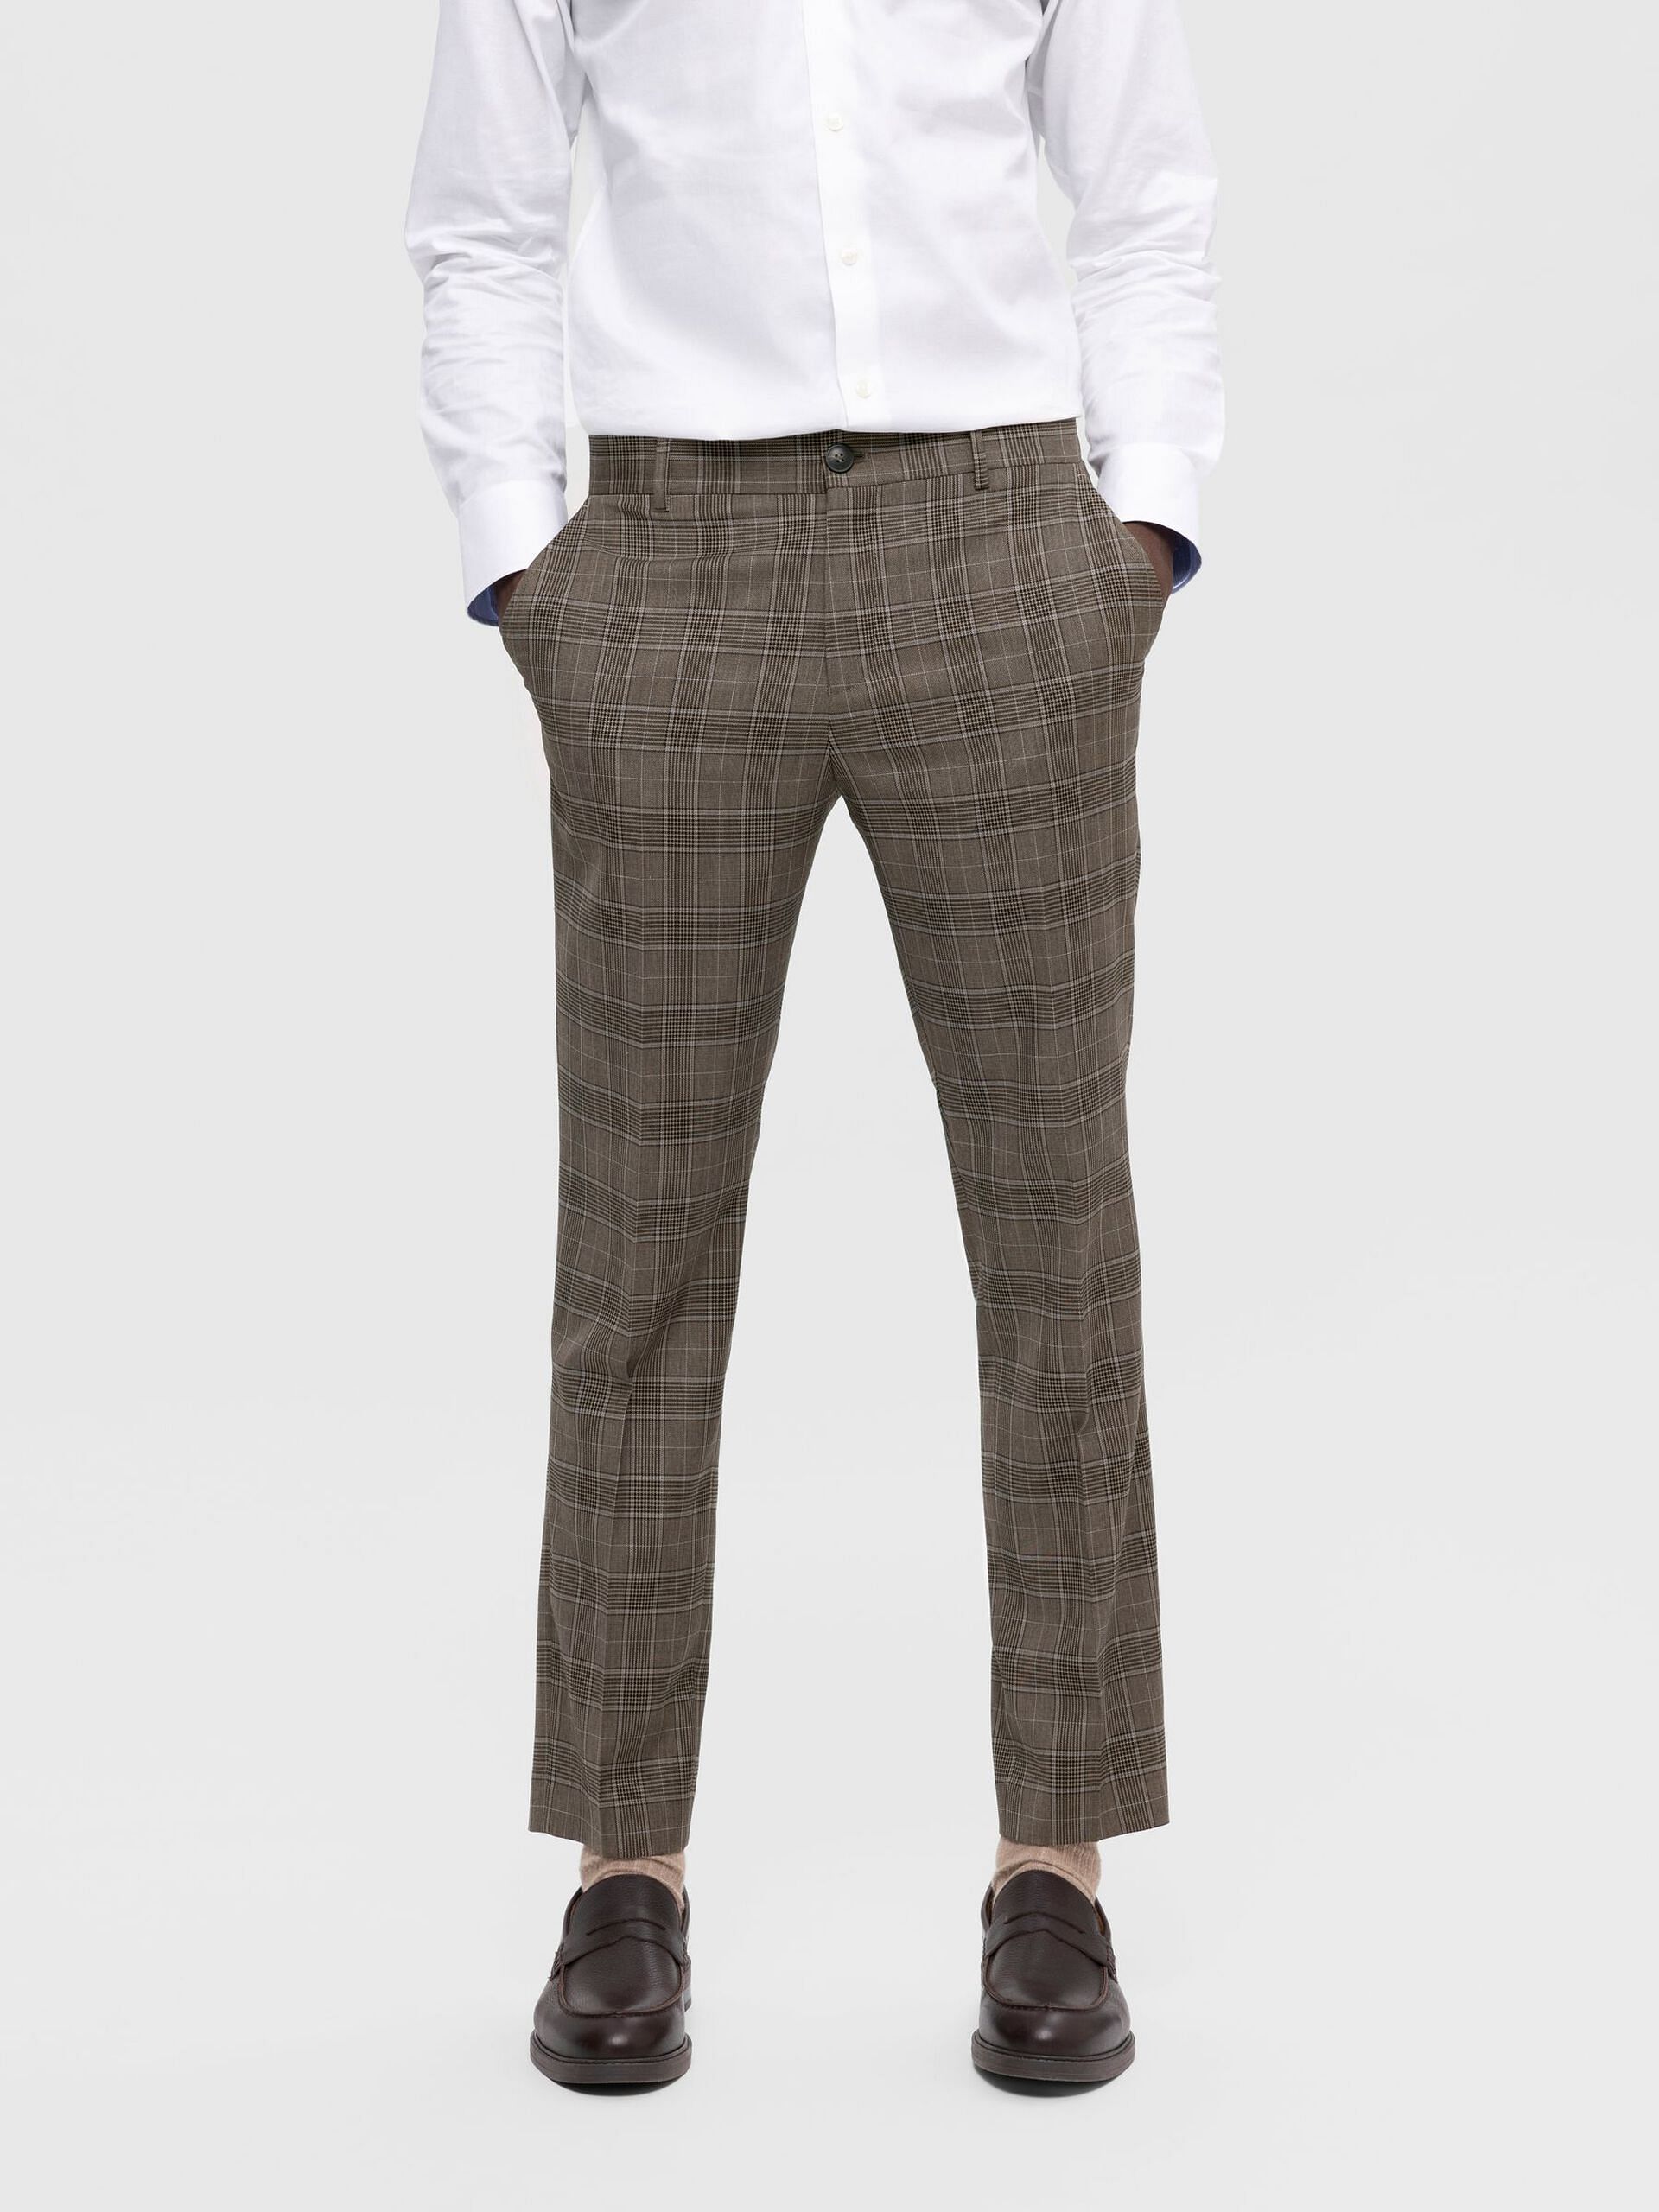 Stretch Slim Fit Suit Pants in Charcoal | Hallensteins NZ